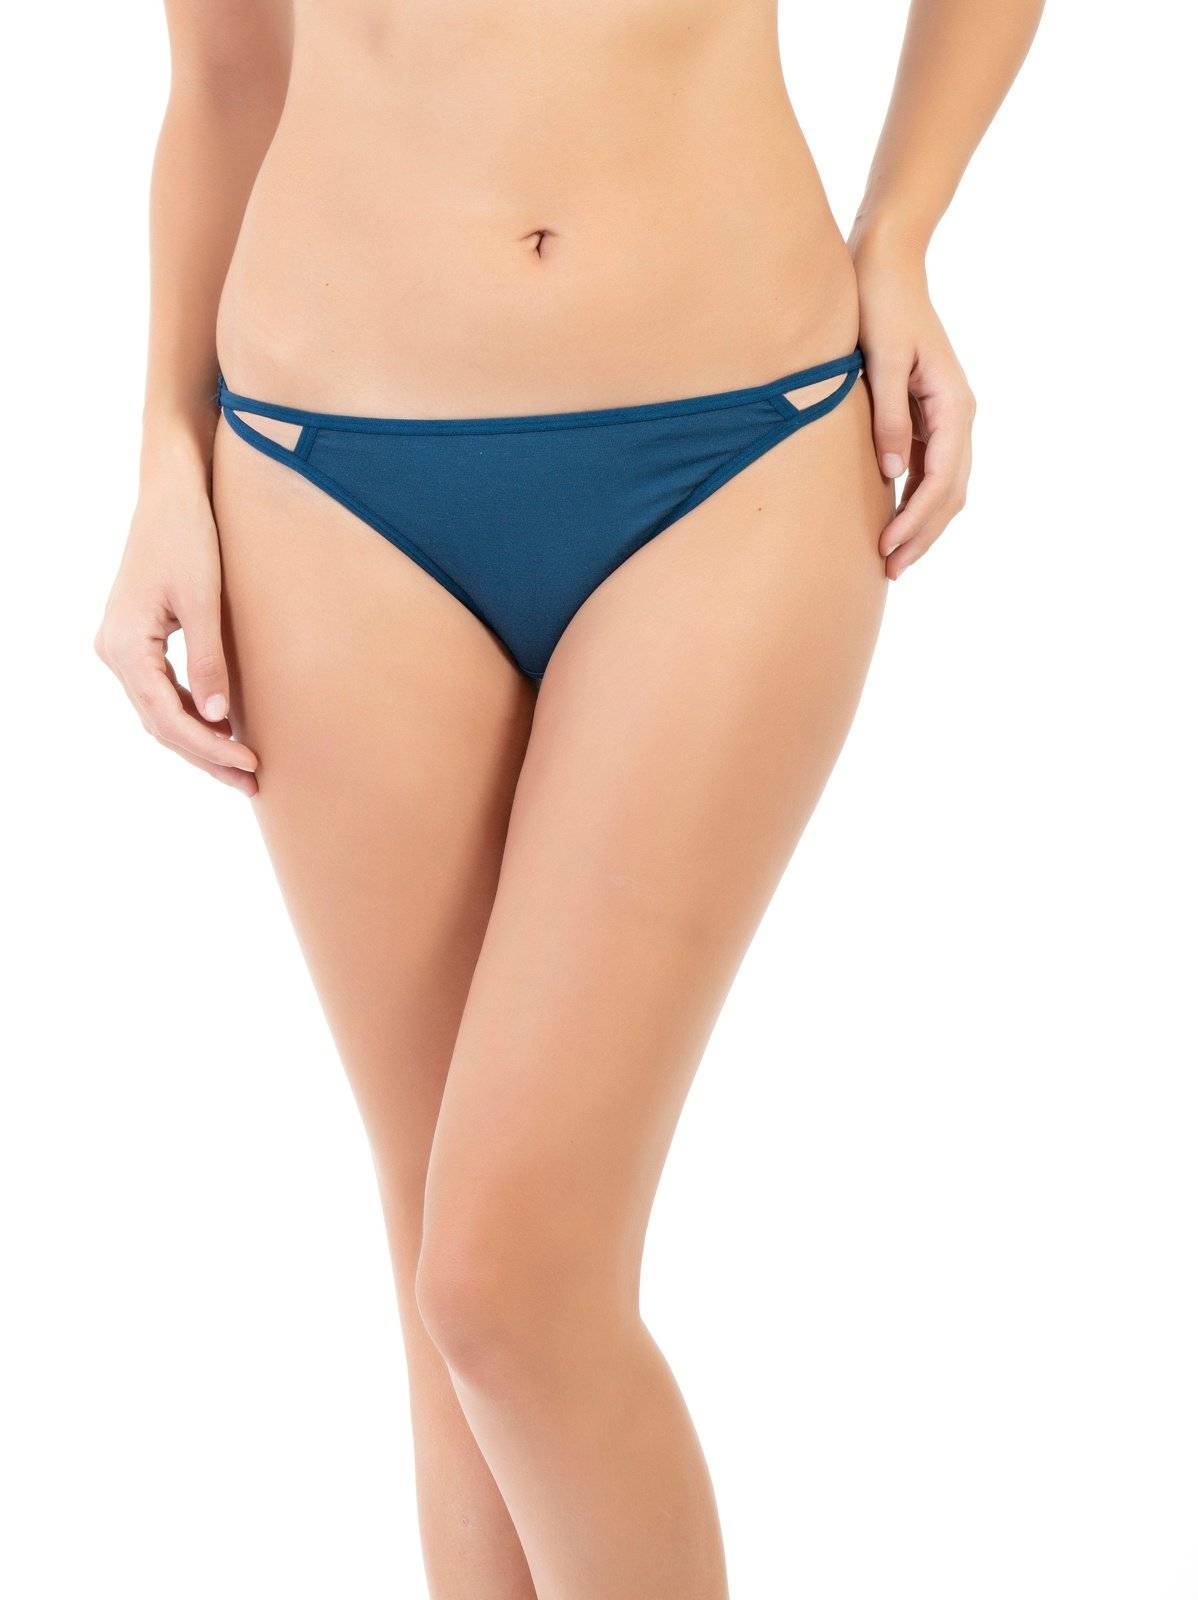 Envie Bikini, Low rise panty, Super Soft Modal fabric for soft touch comfort